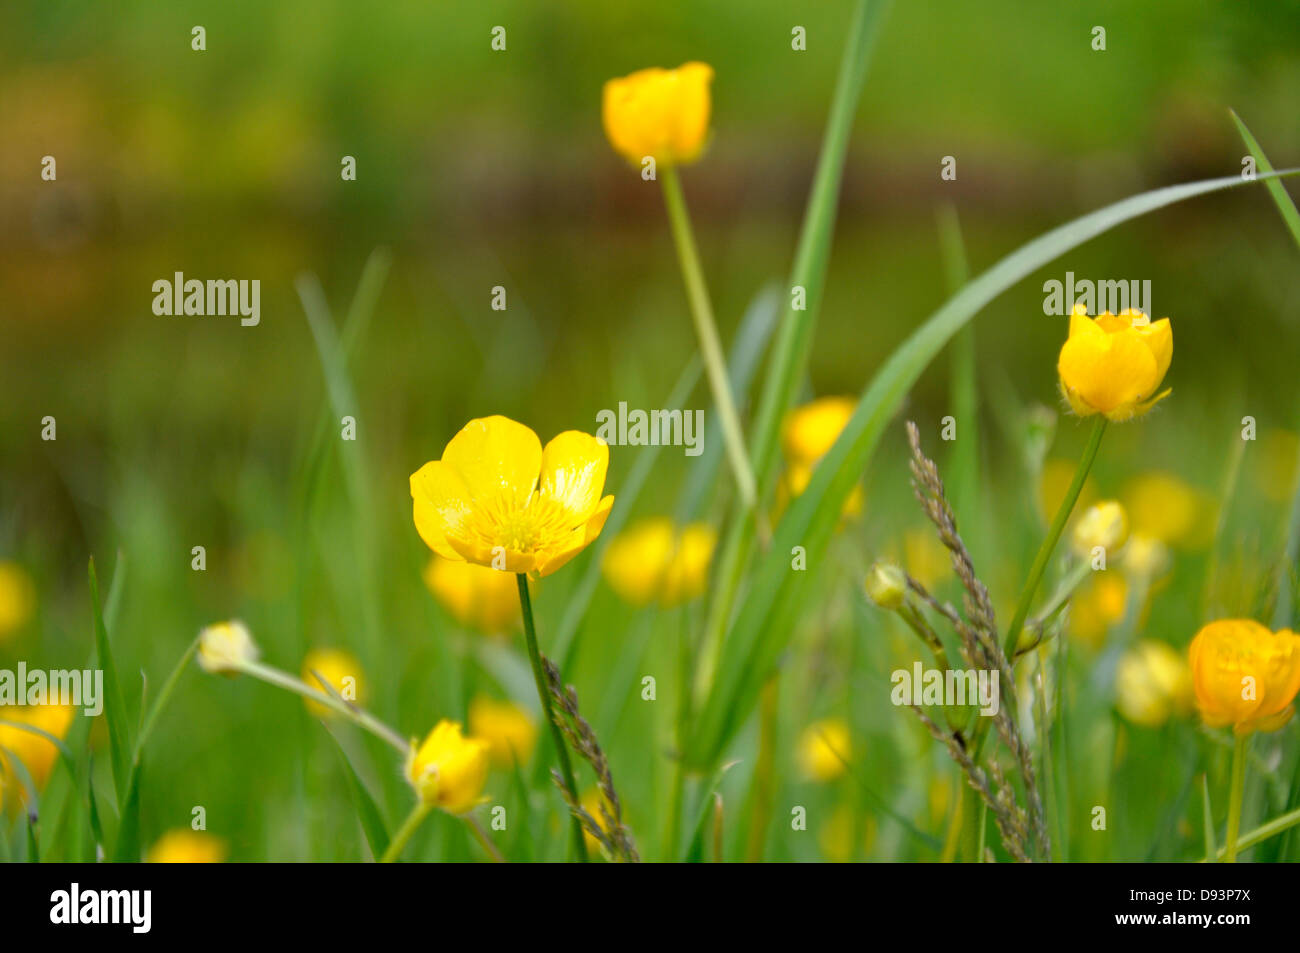 yellow buttercup flowers blowing in the wind in the grass Stock Photo